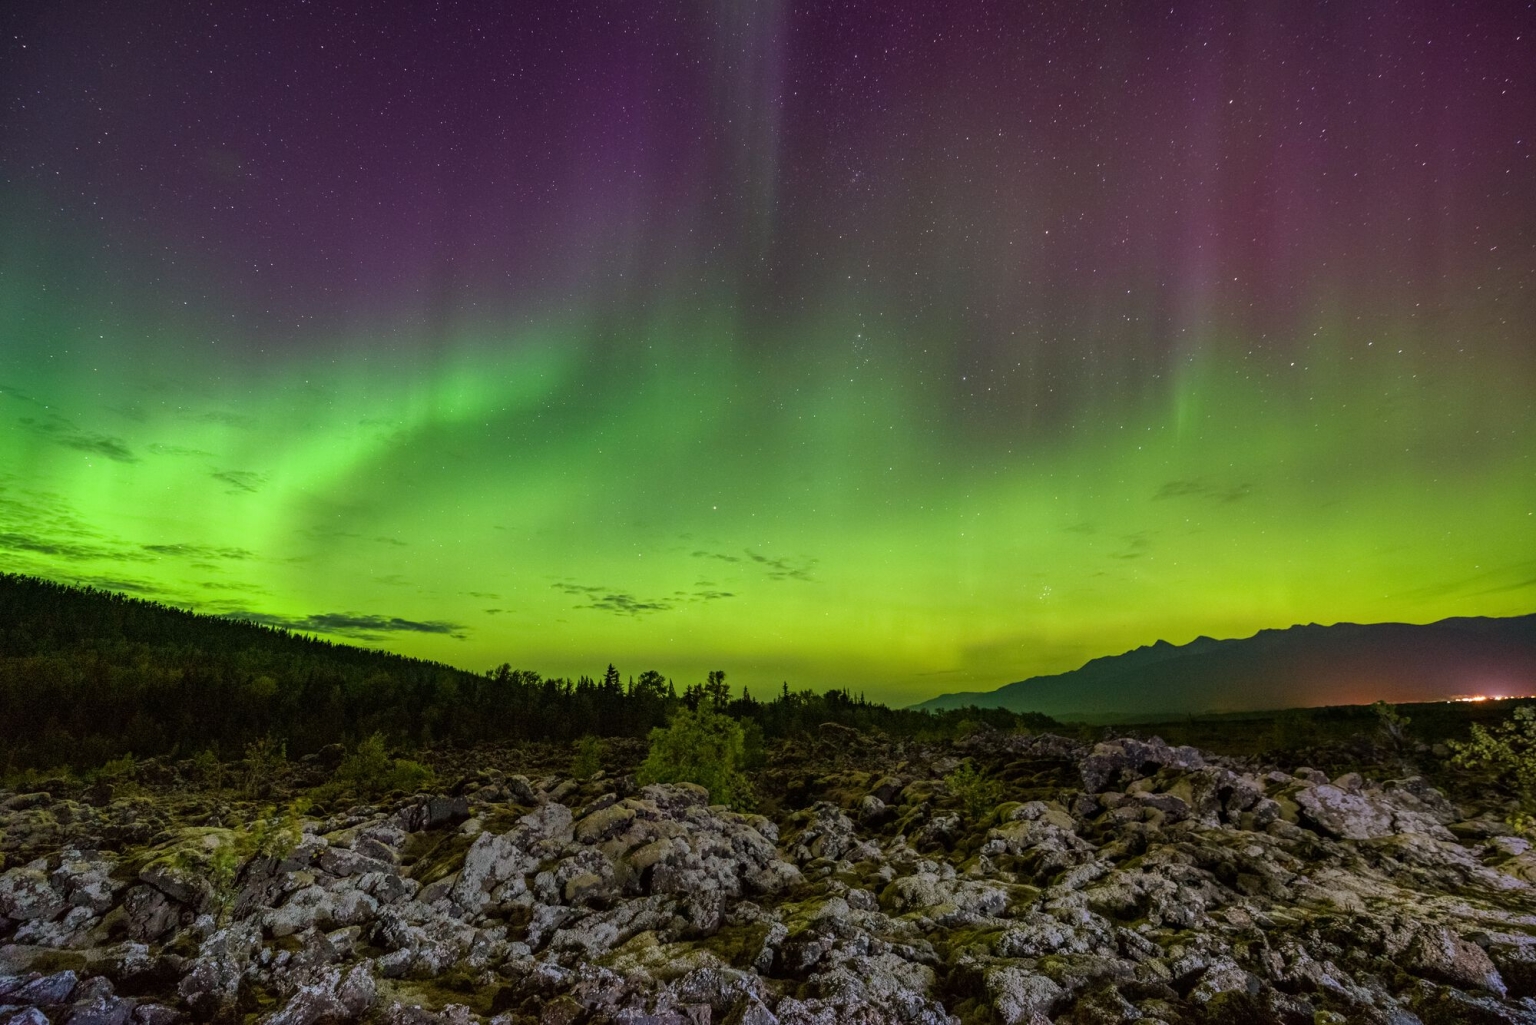 The green and purple Northern Lights illuminate the sky in Nisga'a Memorial Lava Bed Provincial Park.